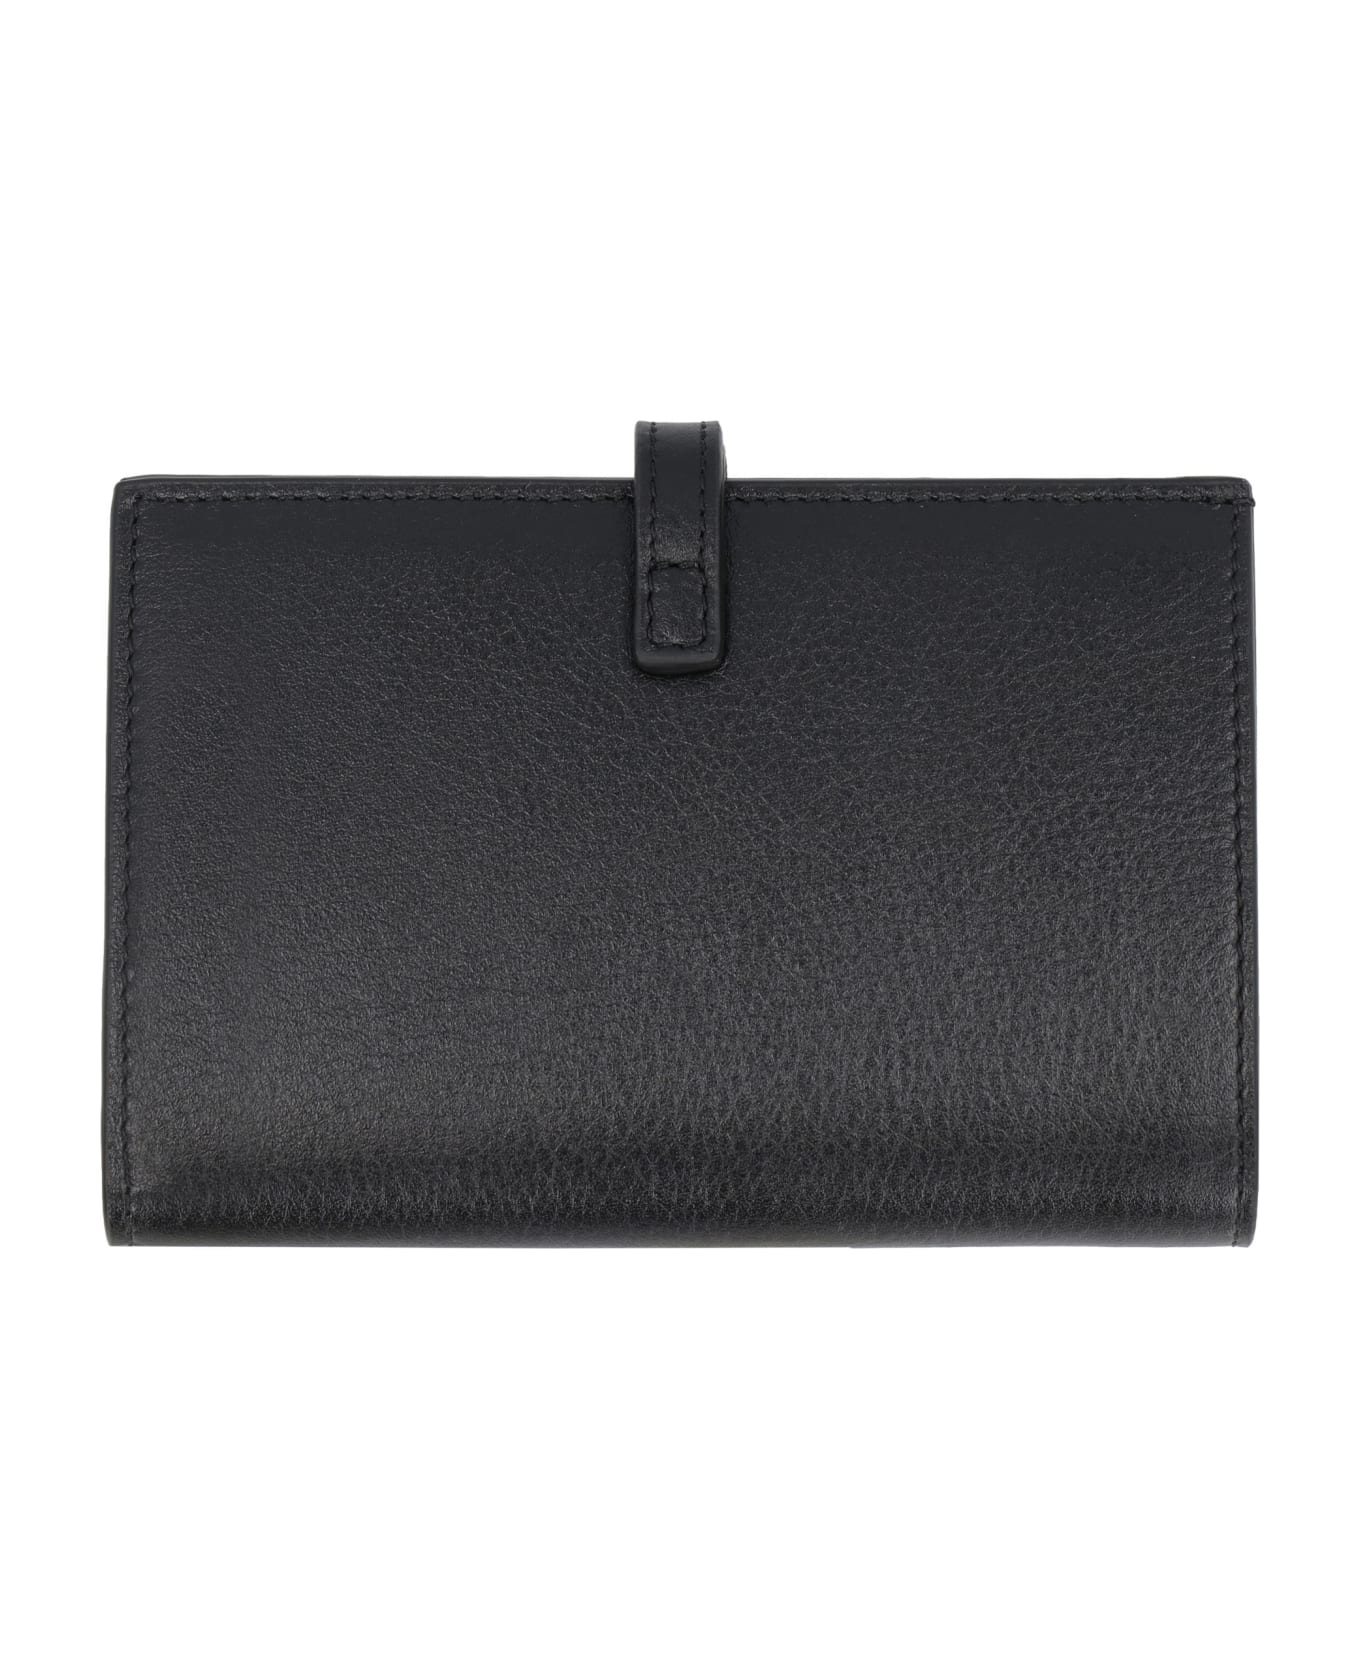 Givenchy Voyou Leather Wallet - BLACK